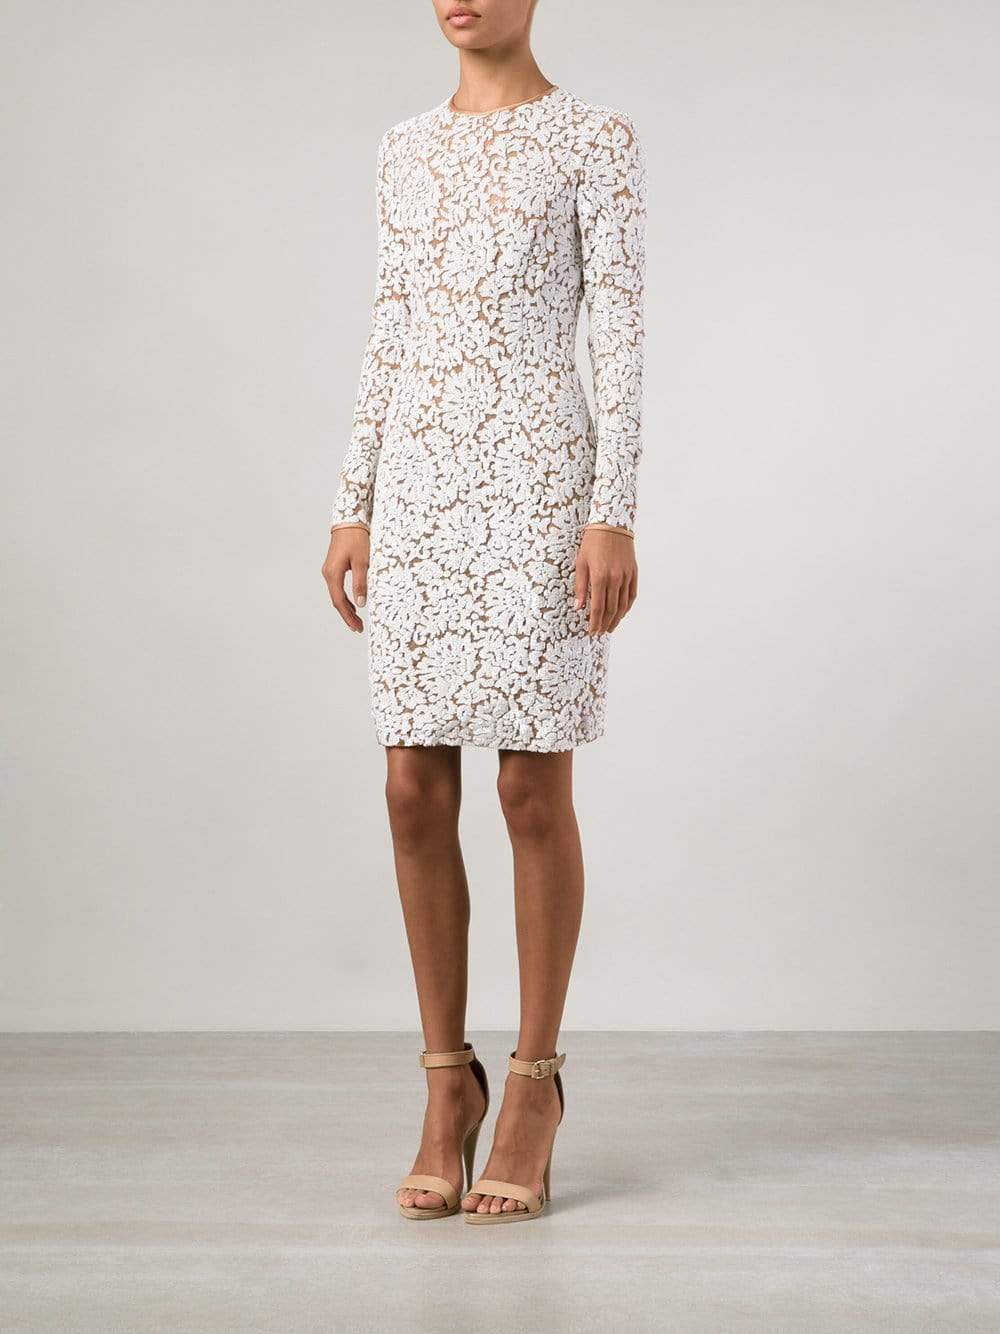 MICHAEL KORS-Lace Embroidered Dress-WHT/SUN